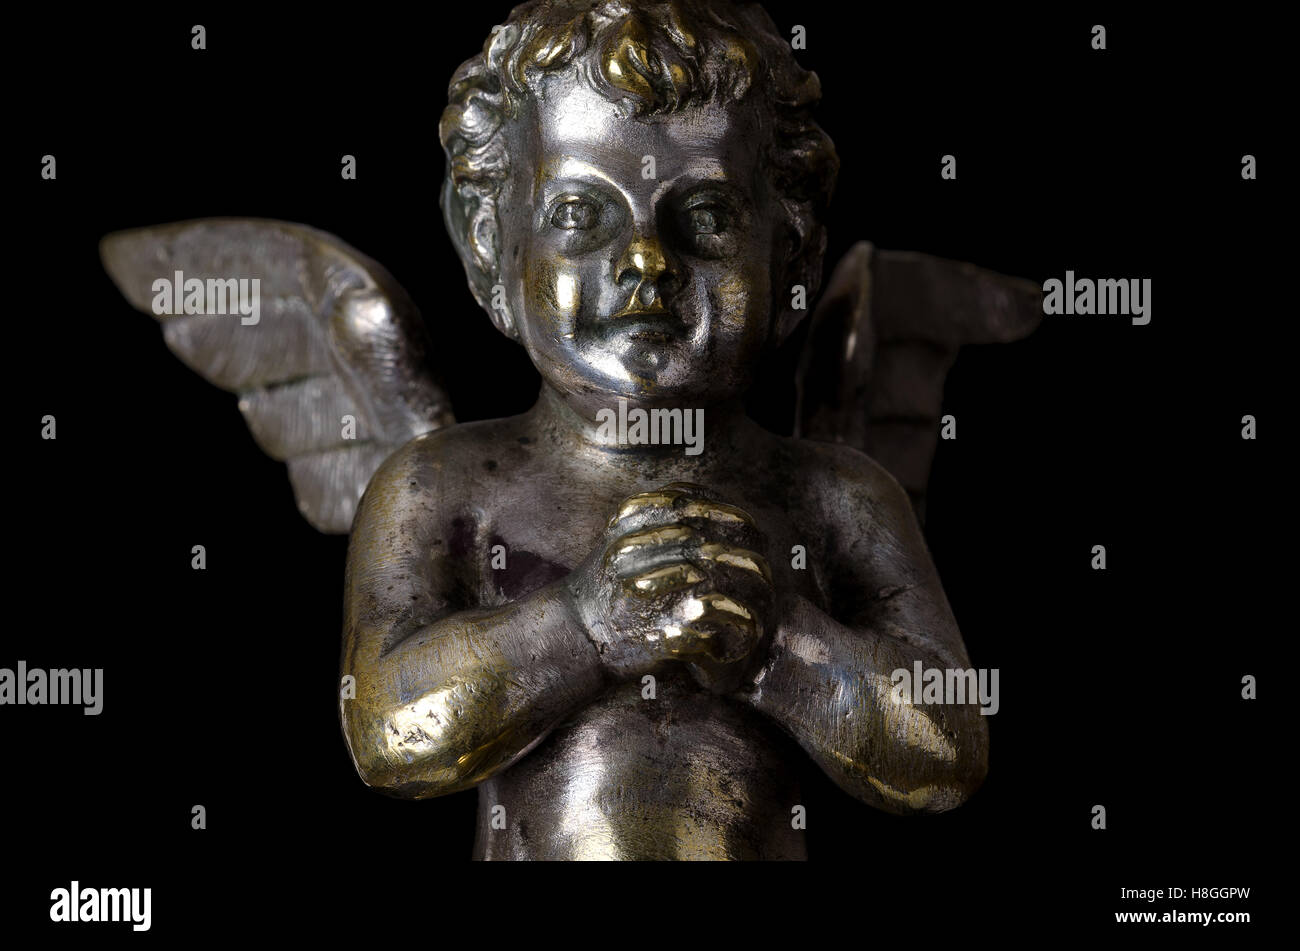 Praying winged putto on black background. Angel made of brass, covered with silver, as part of a candelabra. Stock Photo